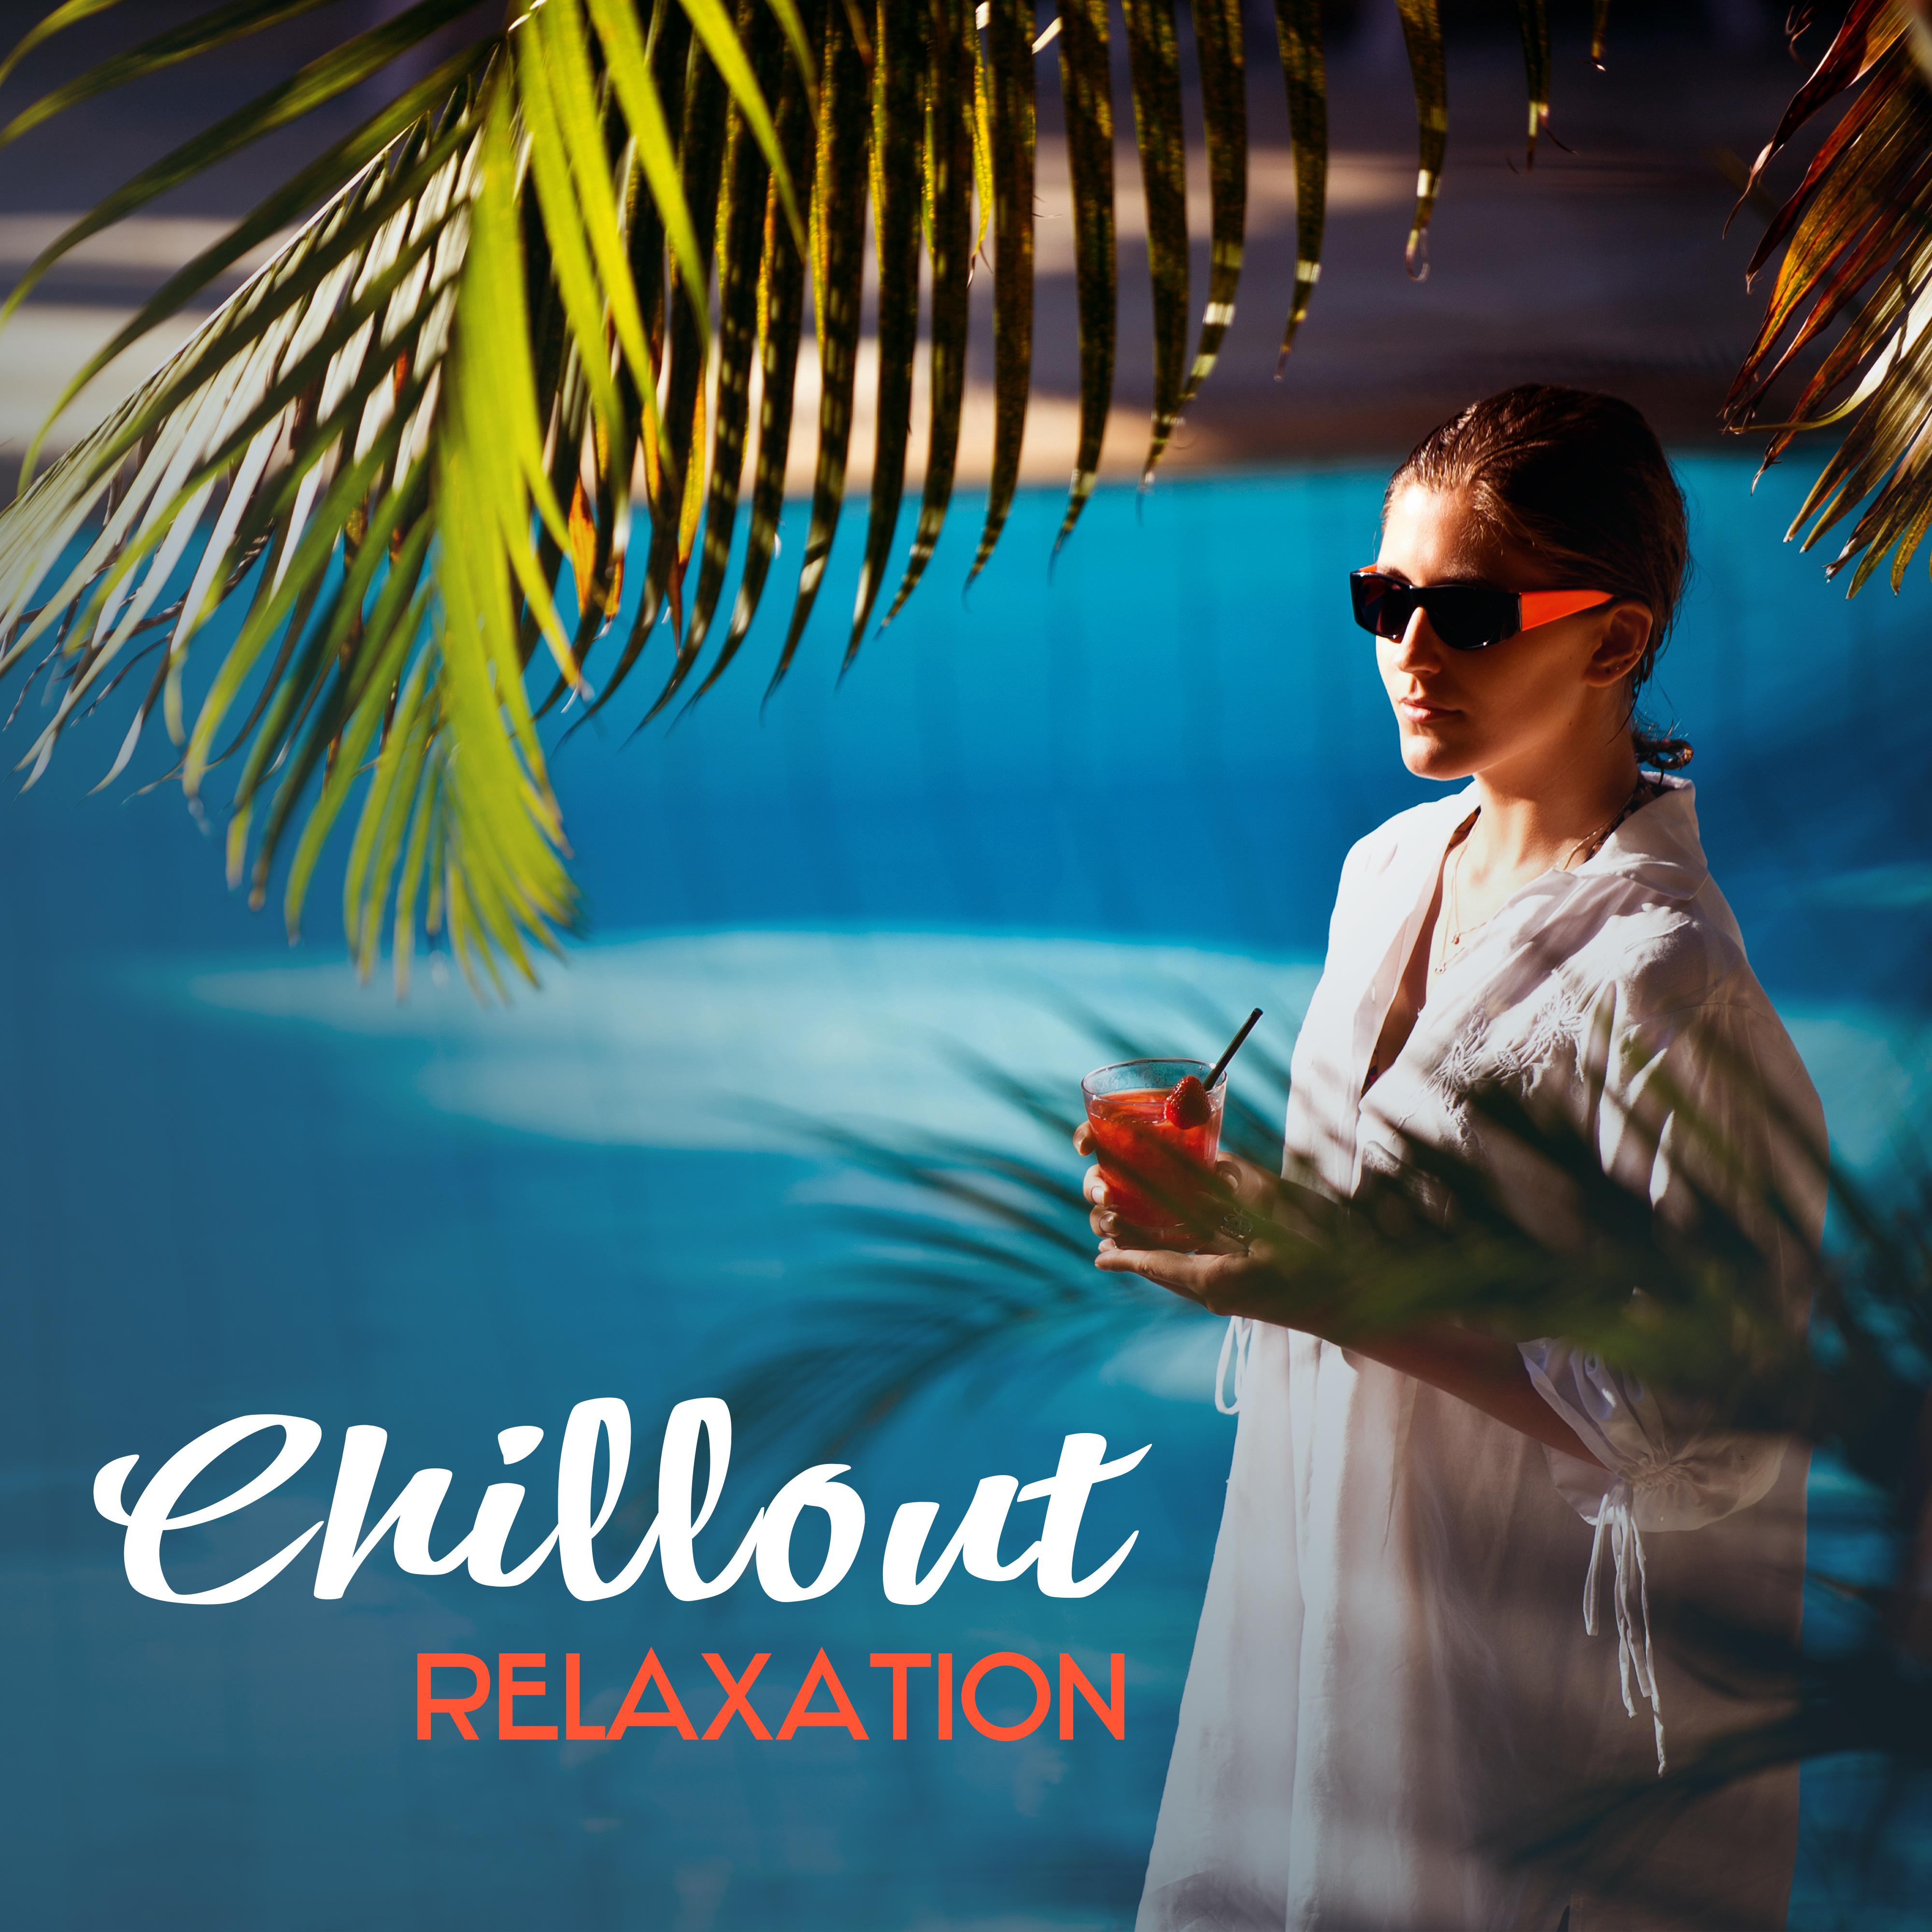 Chillout Relaxation – Electronic Chill Out Music, Deep Relax, Ibiza Lounge, Relaxing Music